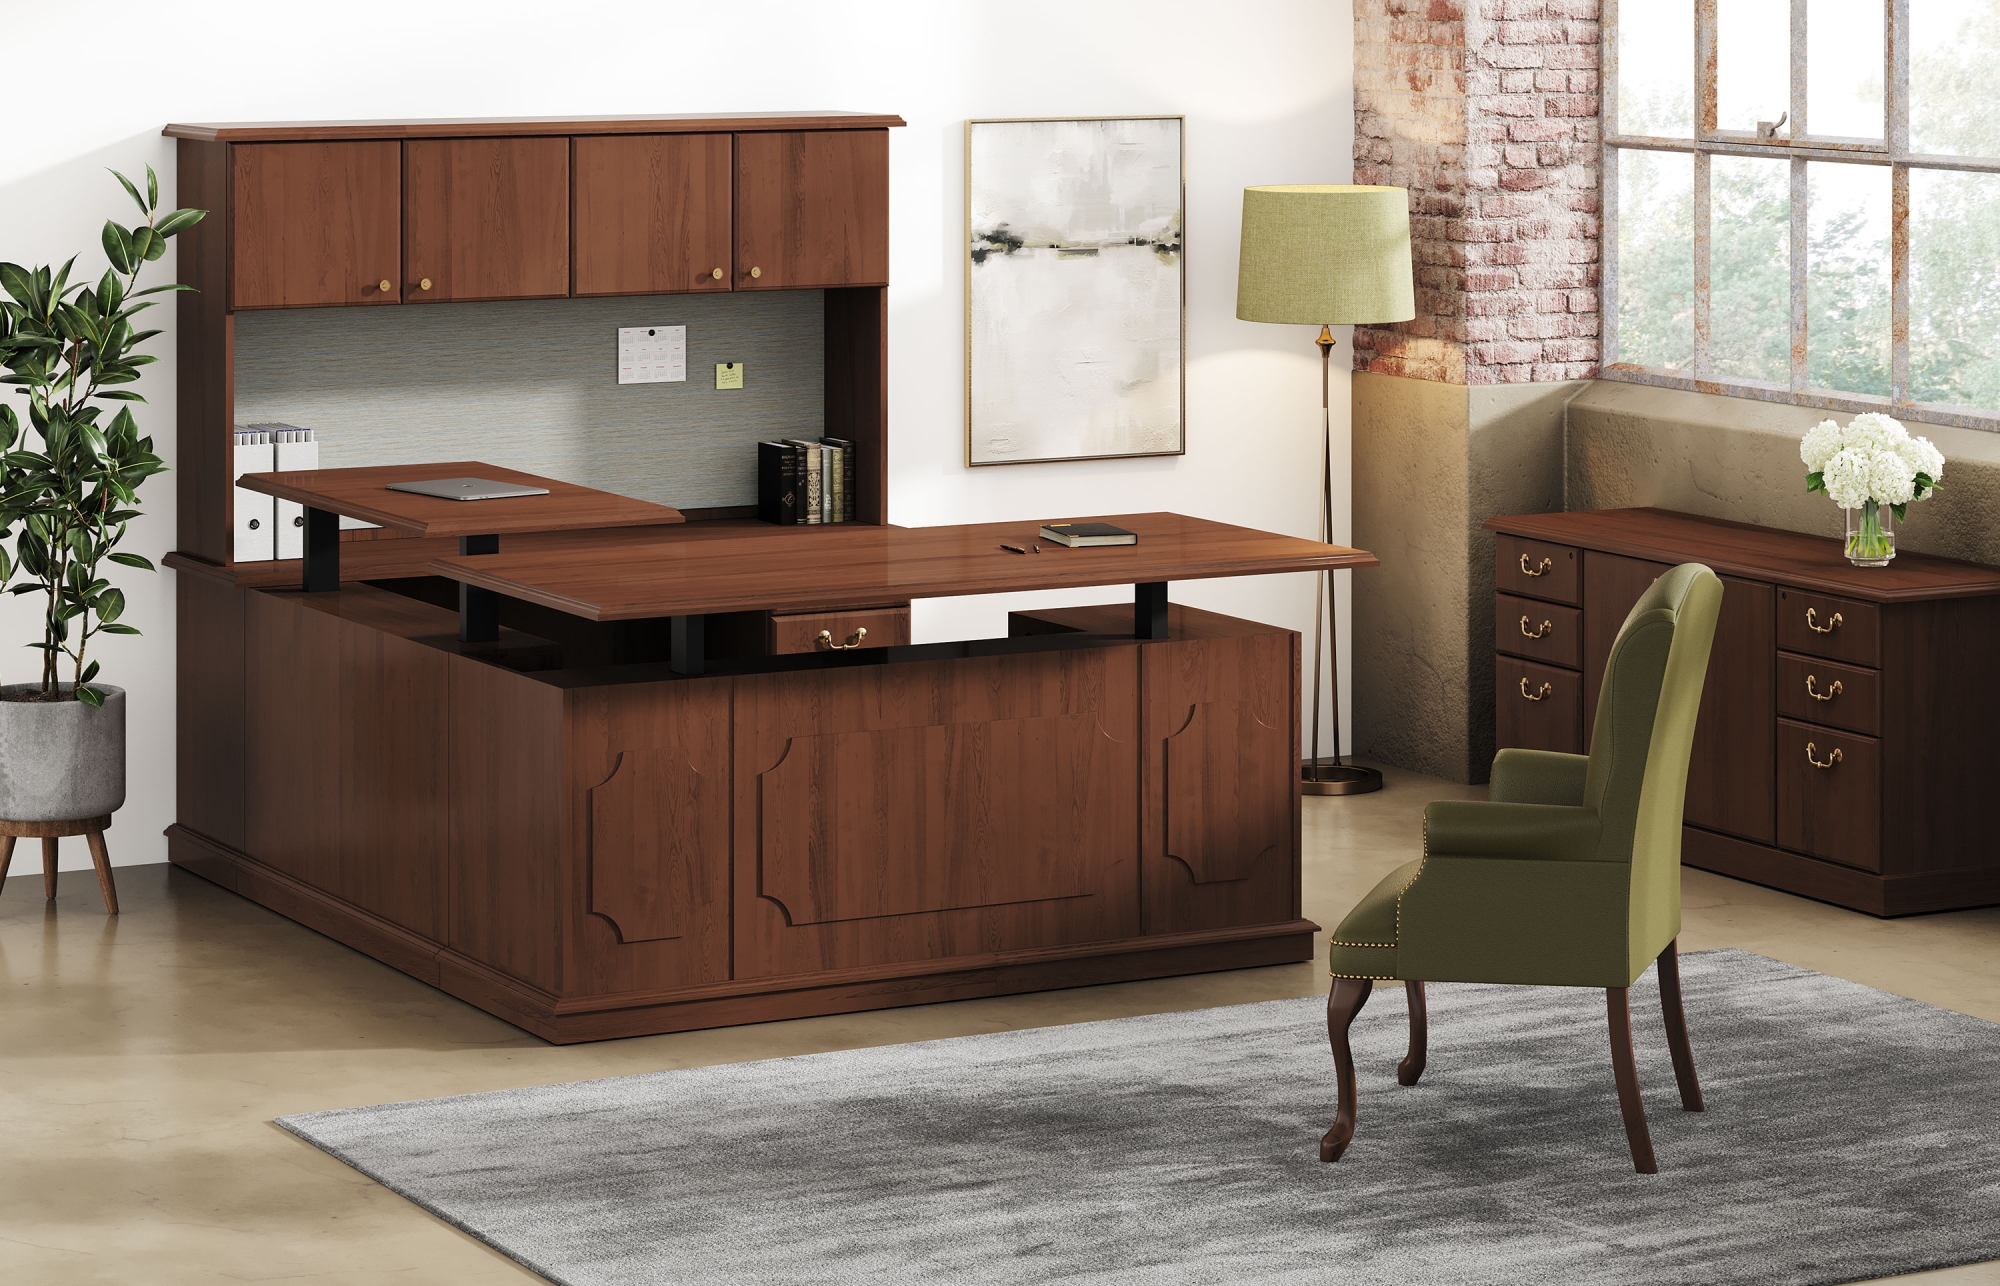 Indiana Furniture, Desks + Workstations, Filing + Storage, Arlington offers all the grace and embellishments associated with